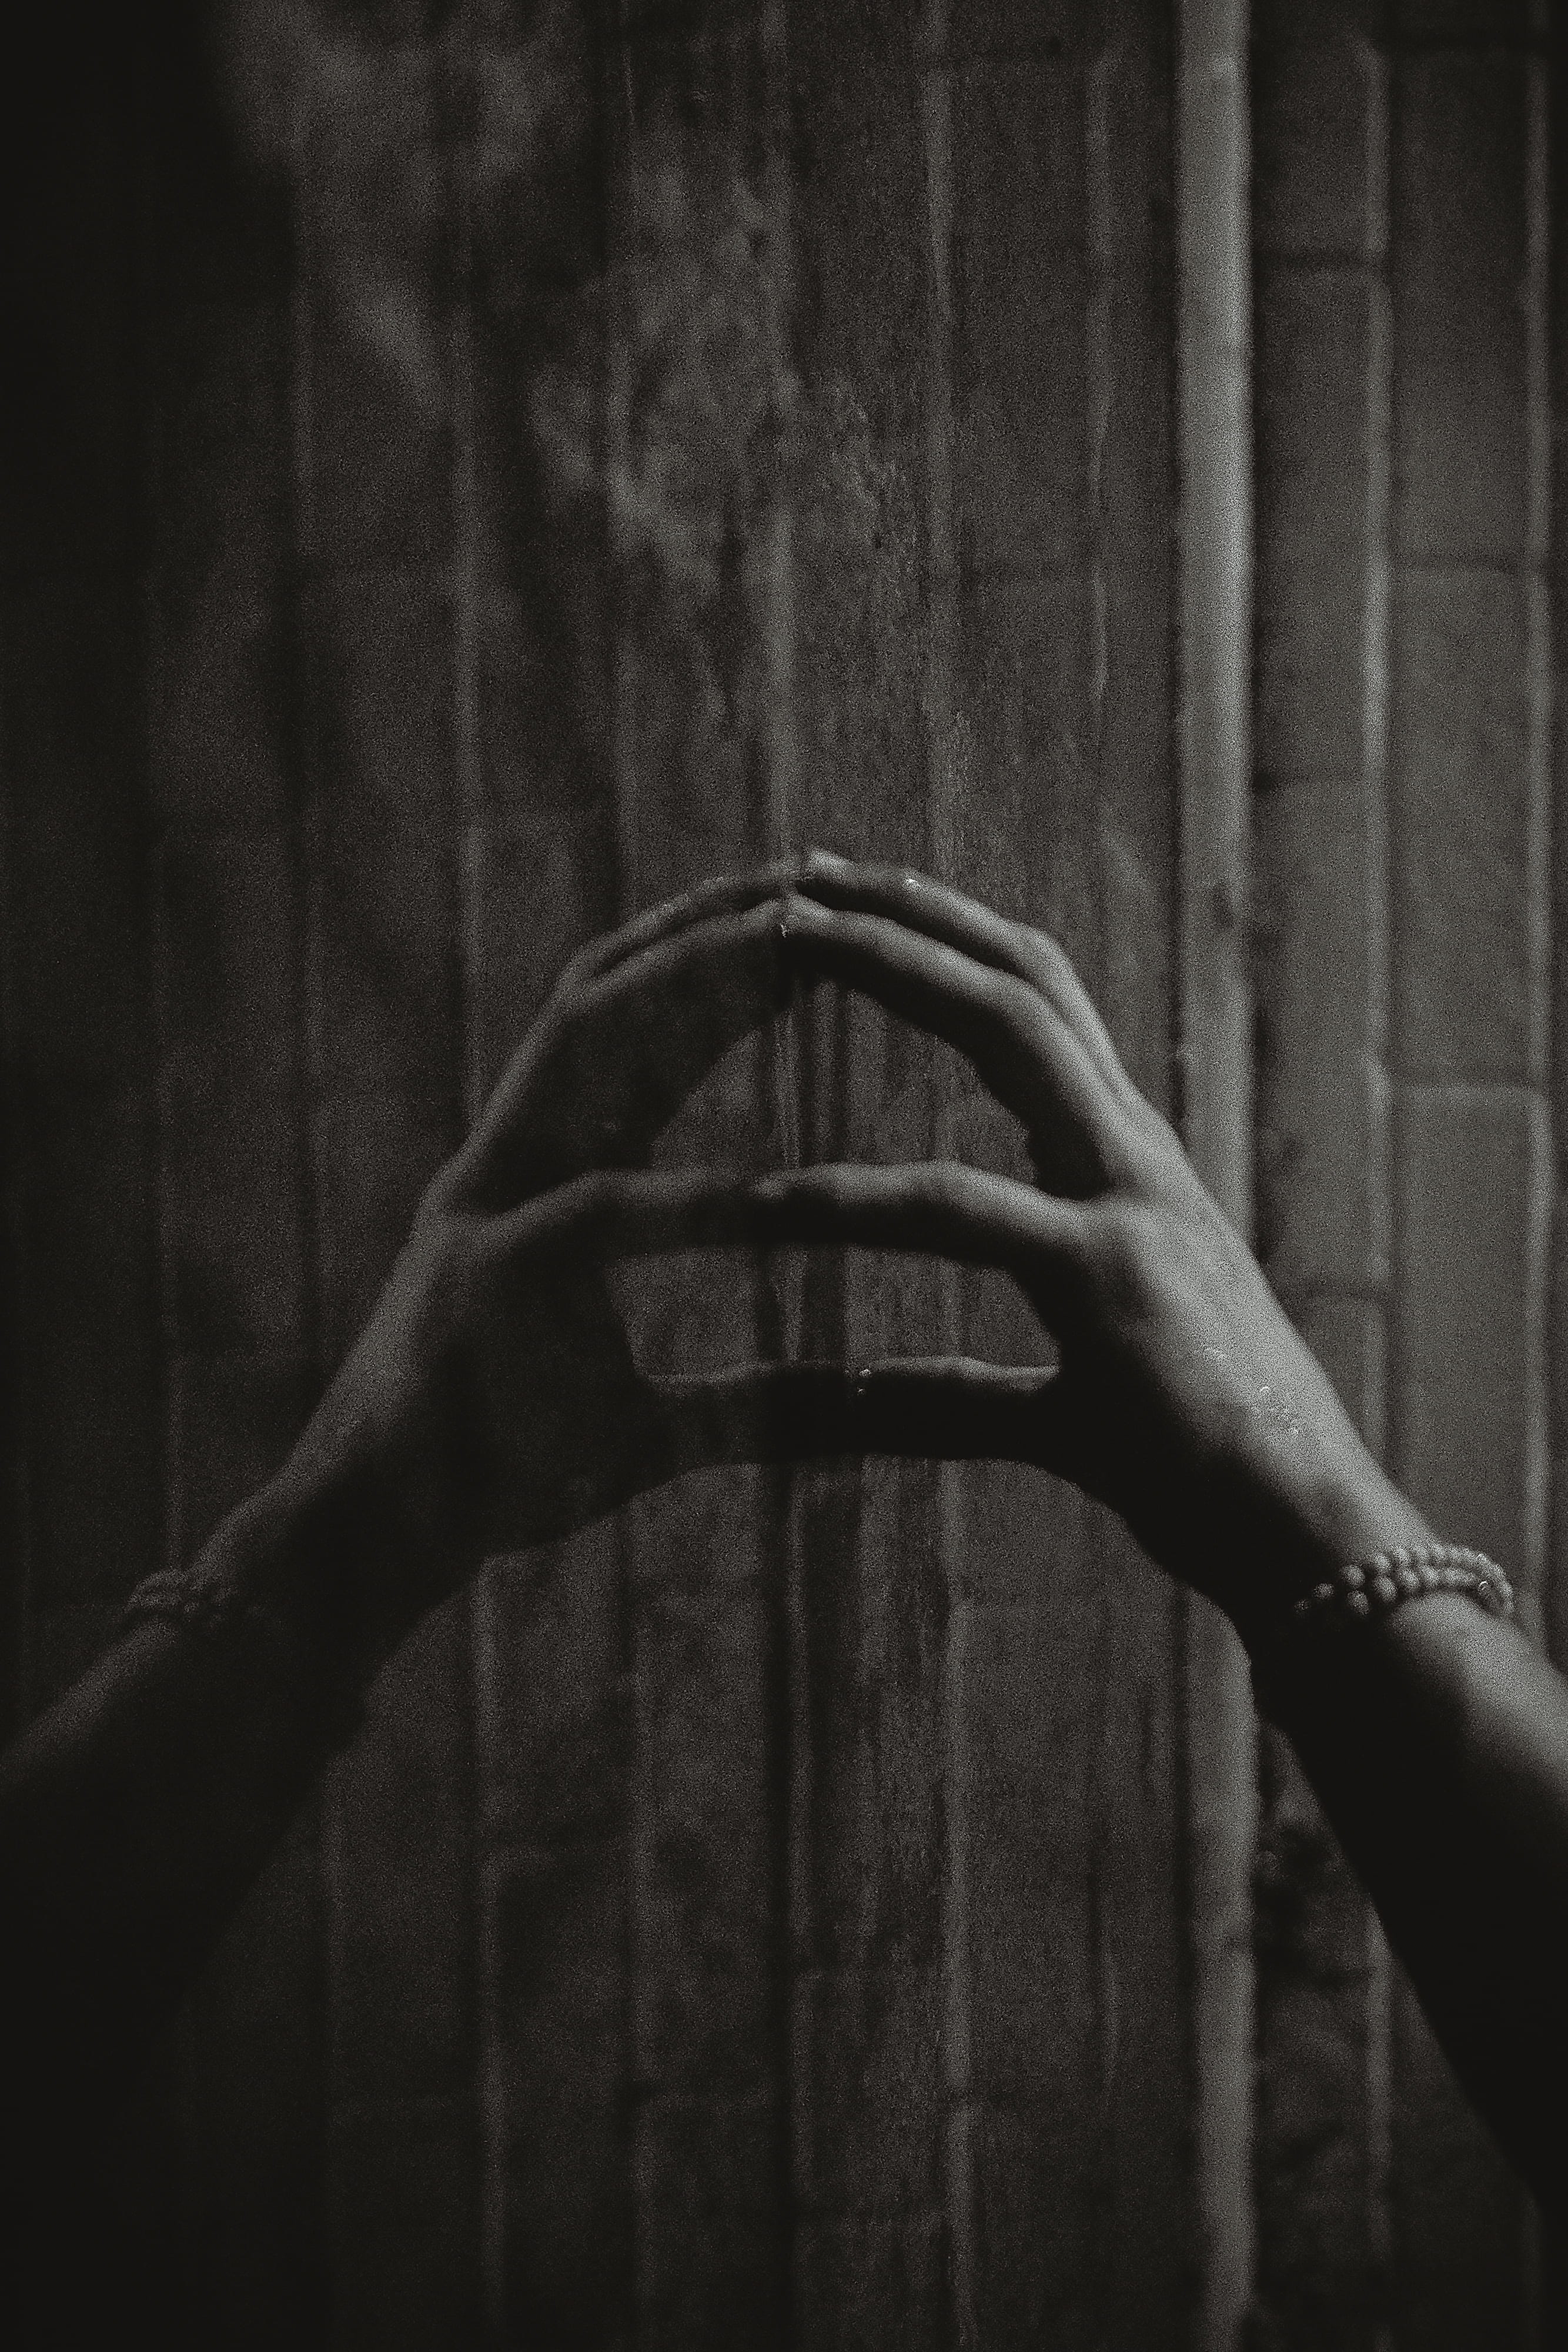 person touching wall, hands, fingers, arm, horror, mirror, reflection